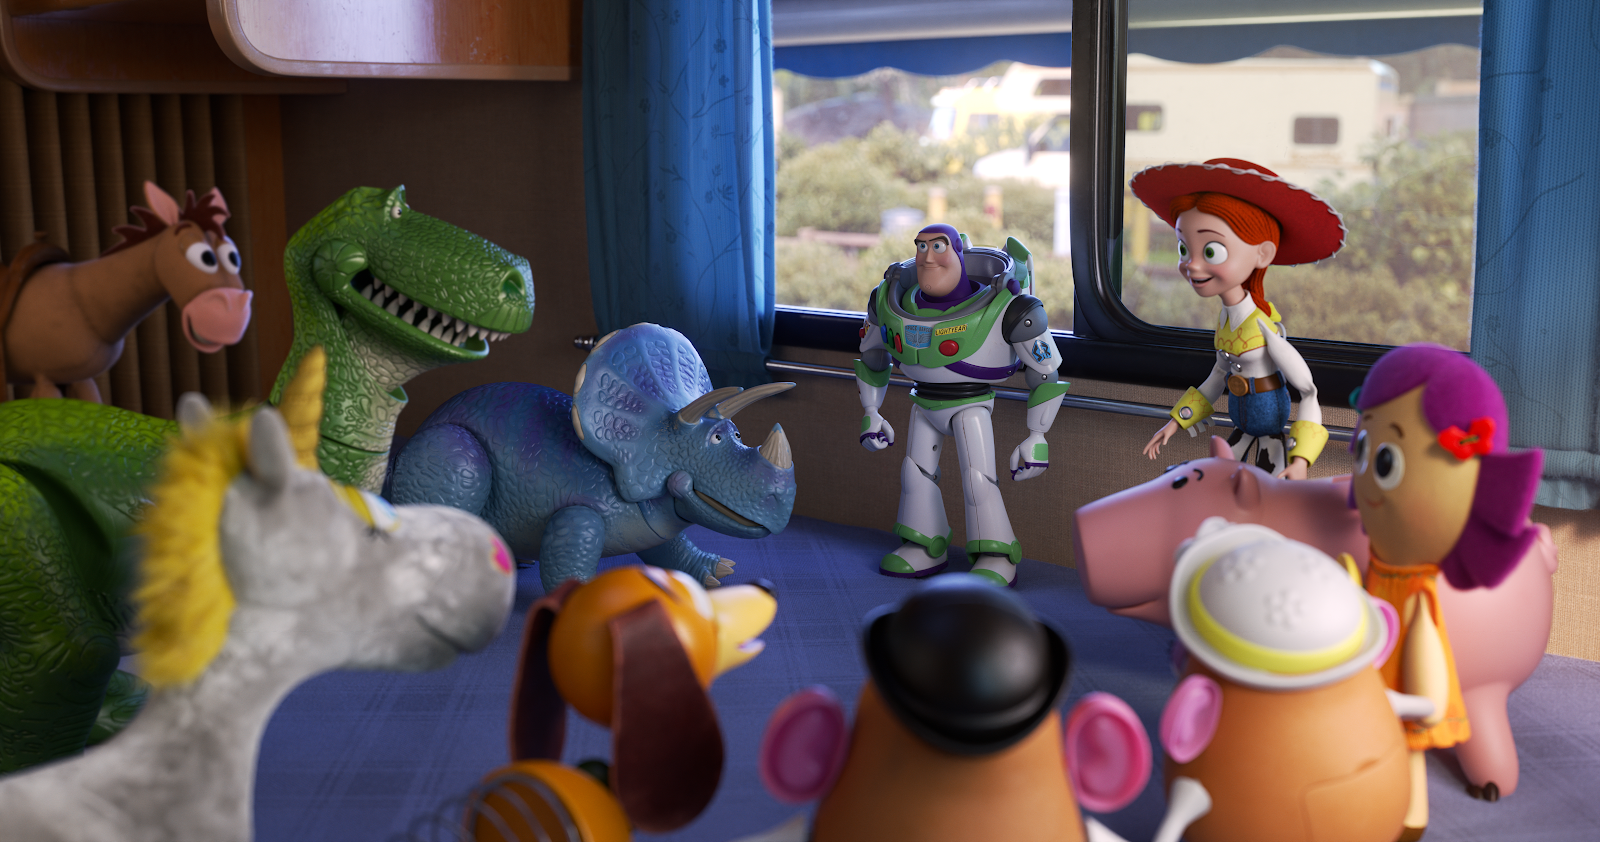 Image result for Toy story 4 laughingplace